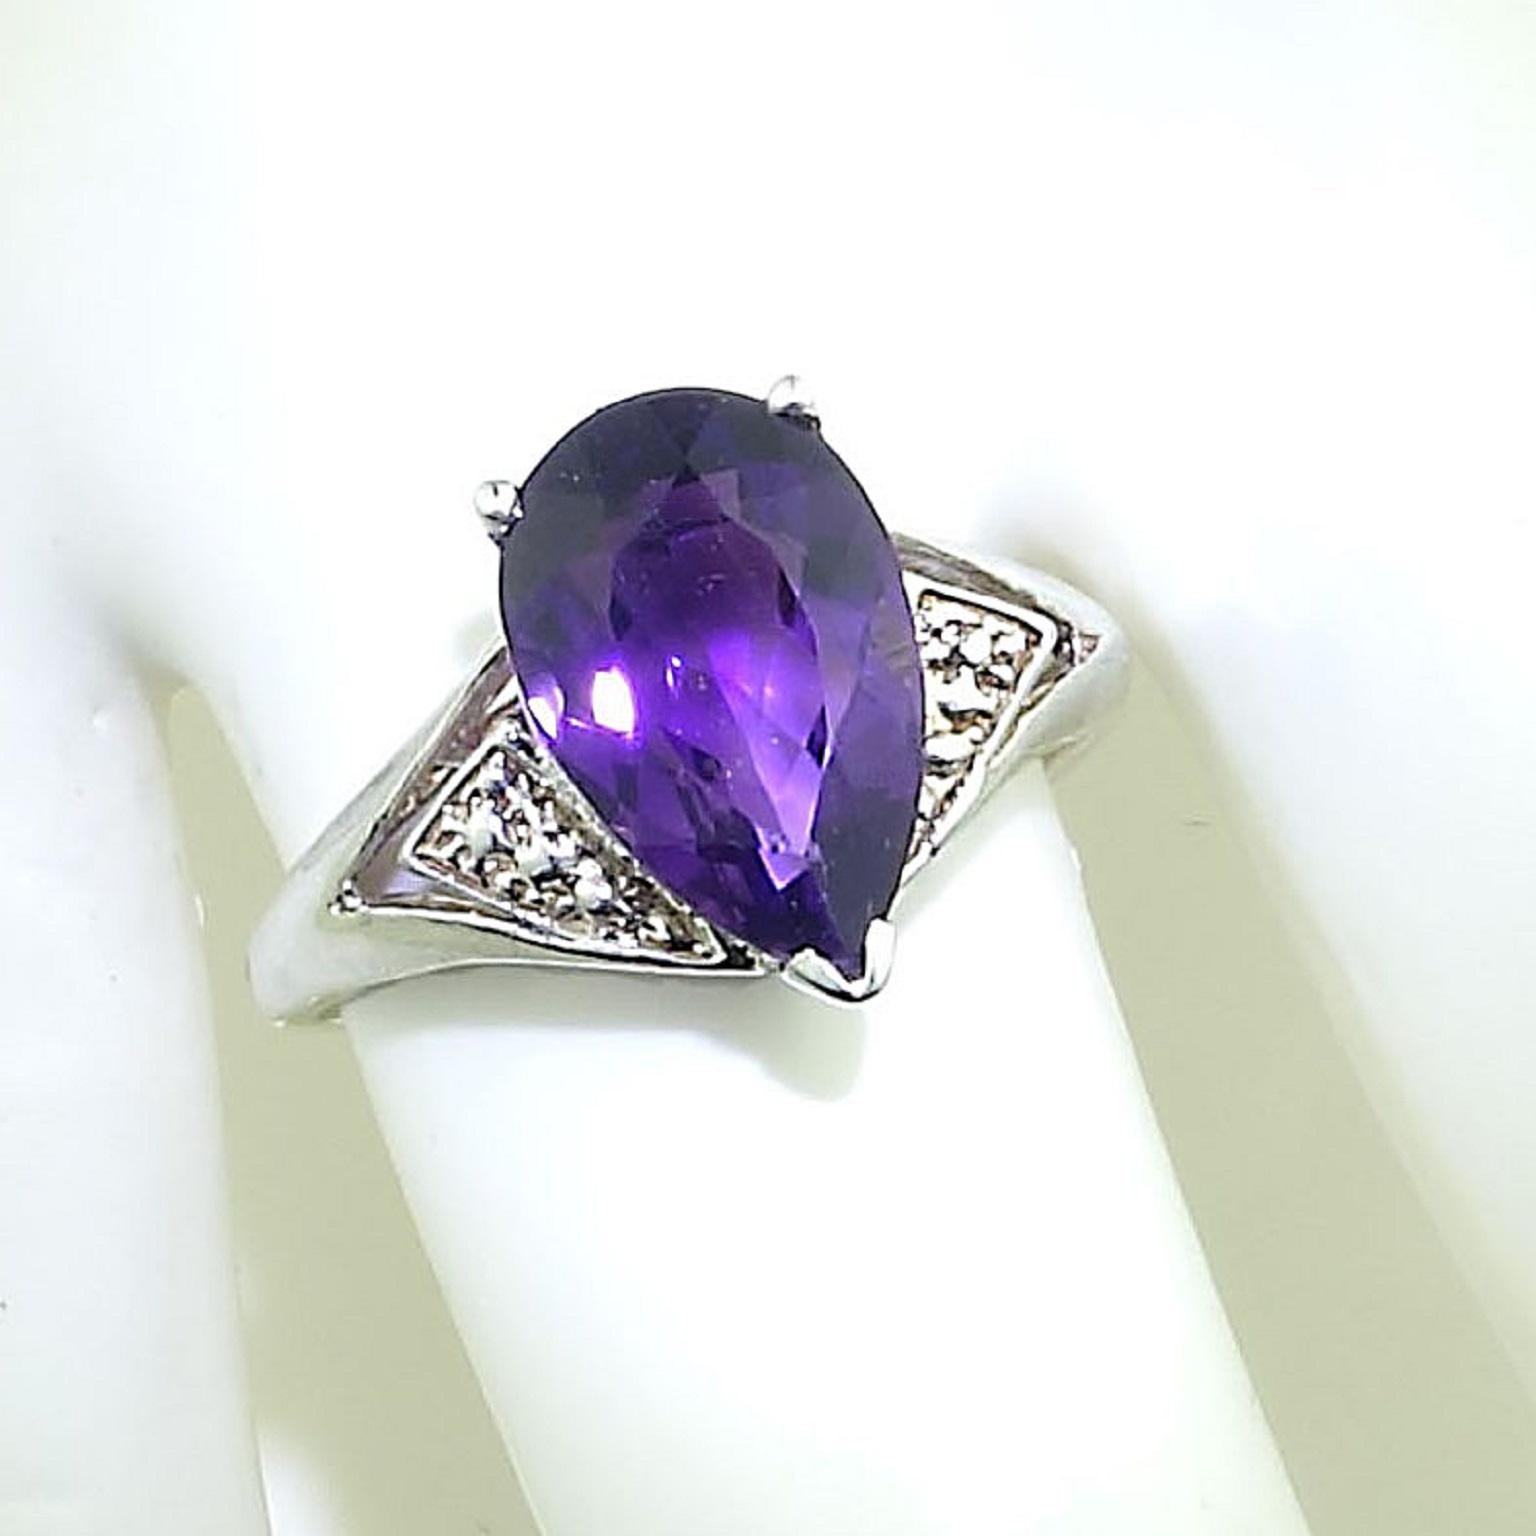 Custom made, sparkling long pear-shaped Brazilian Amethyst set in rhodium plated Sterling Silver ring. This lovely Amethyst is three prongs set above a lovely ring with detail on the shoulders and open work gallery. It is a sizable 8.5.  The